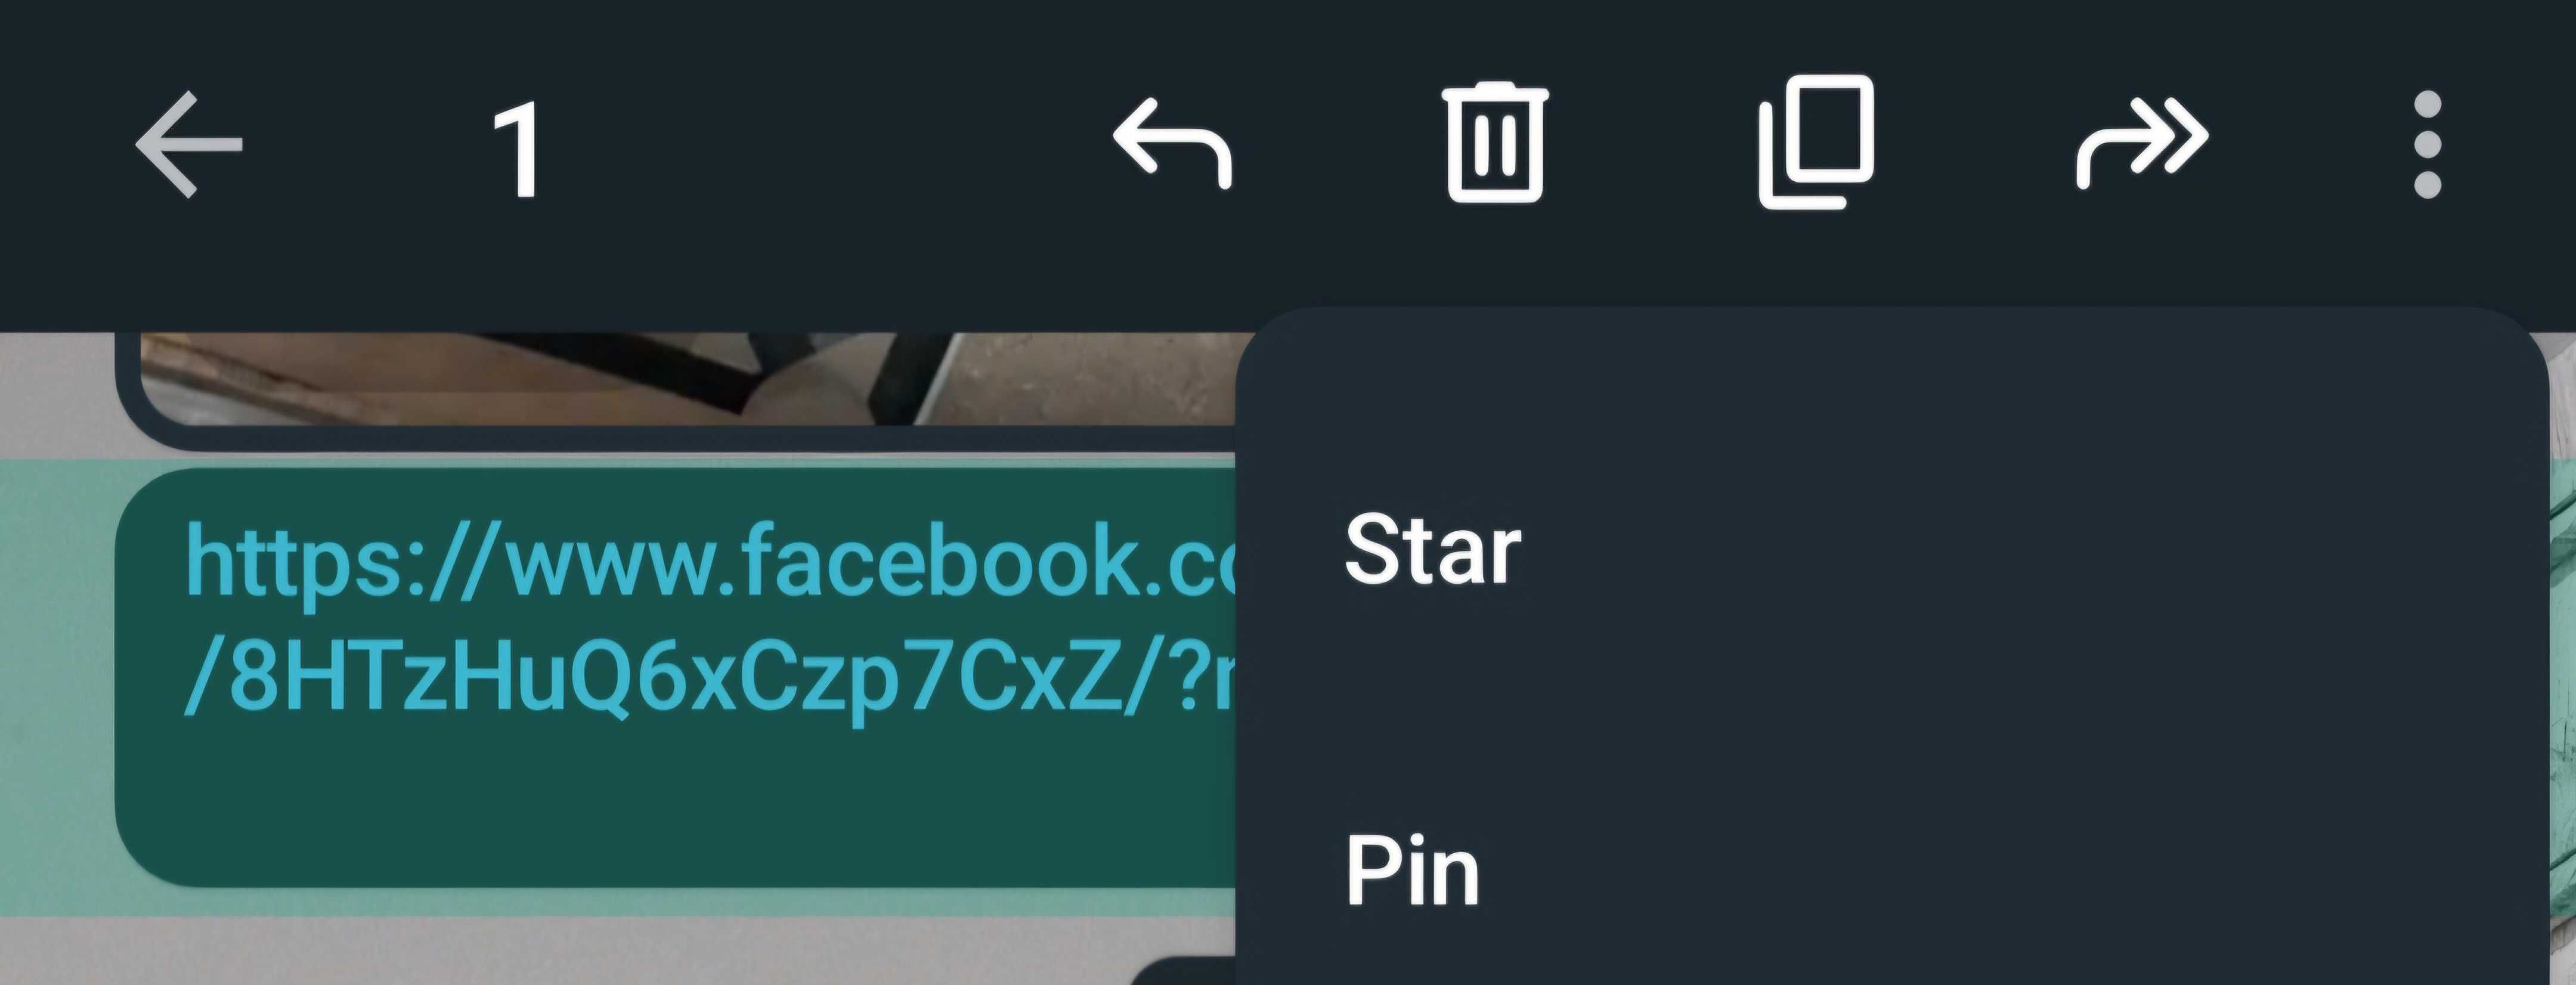 Pinning a message in the WhatsApp app on Android